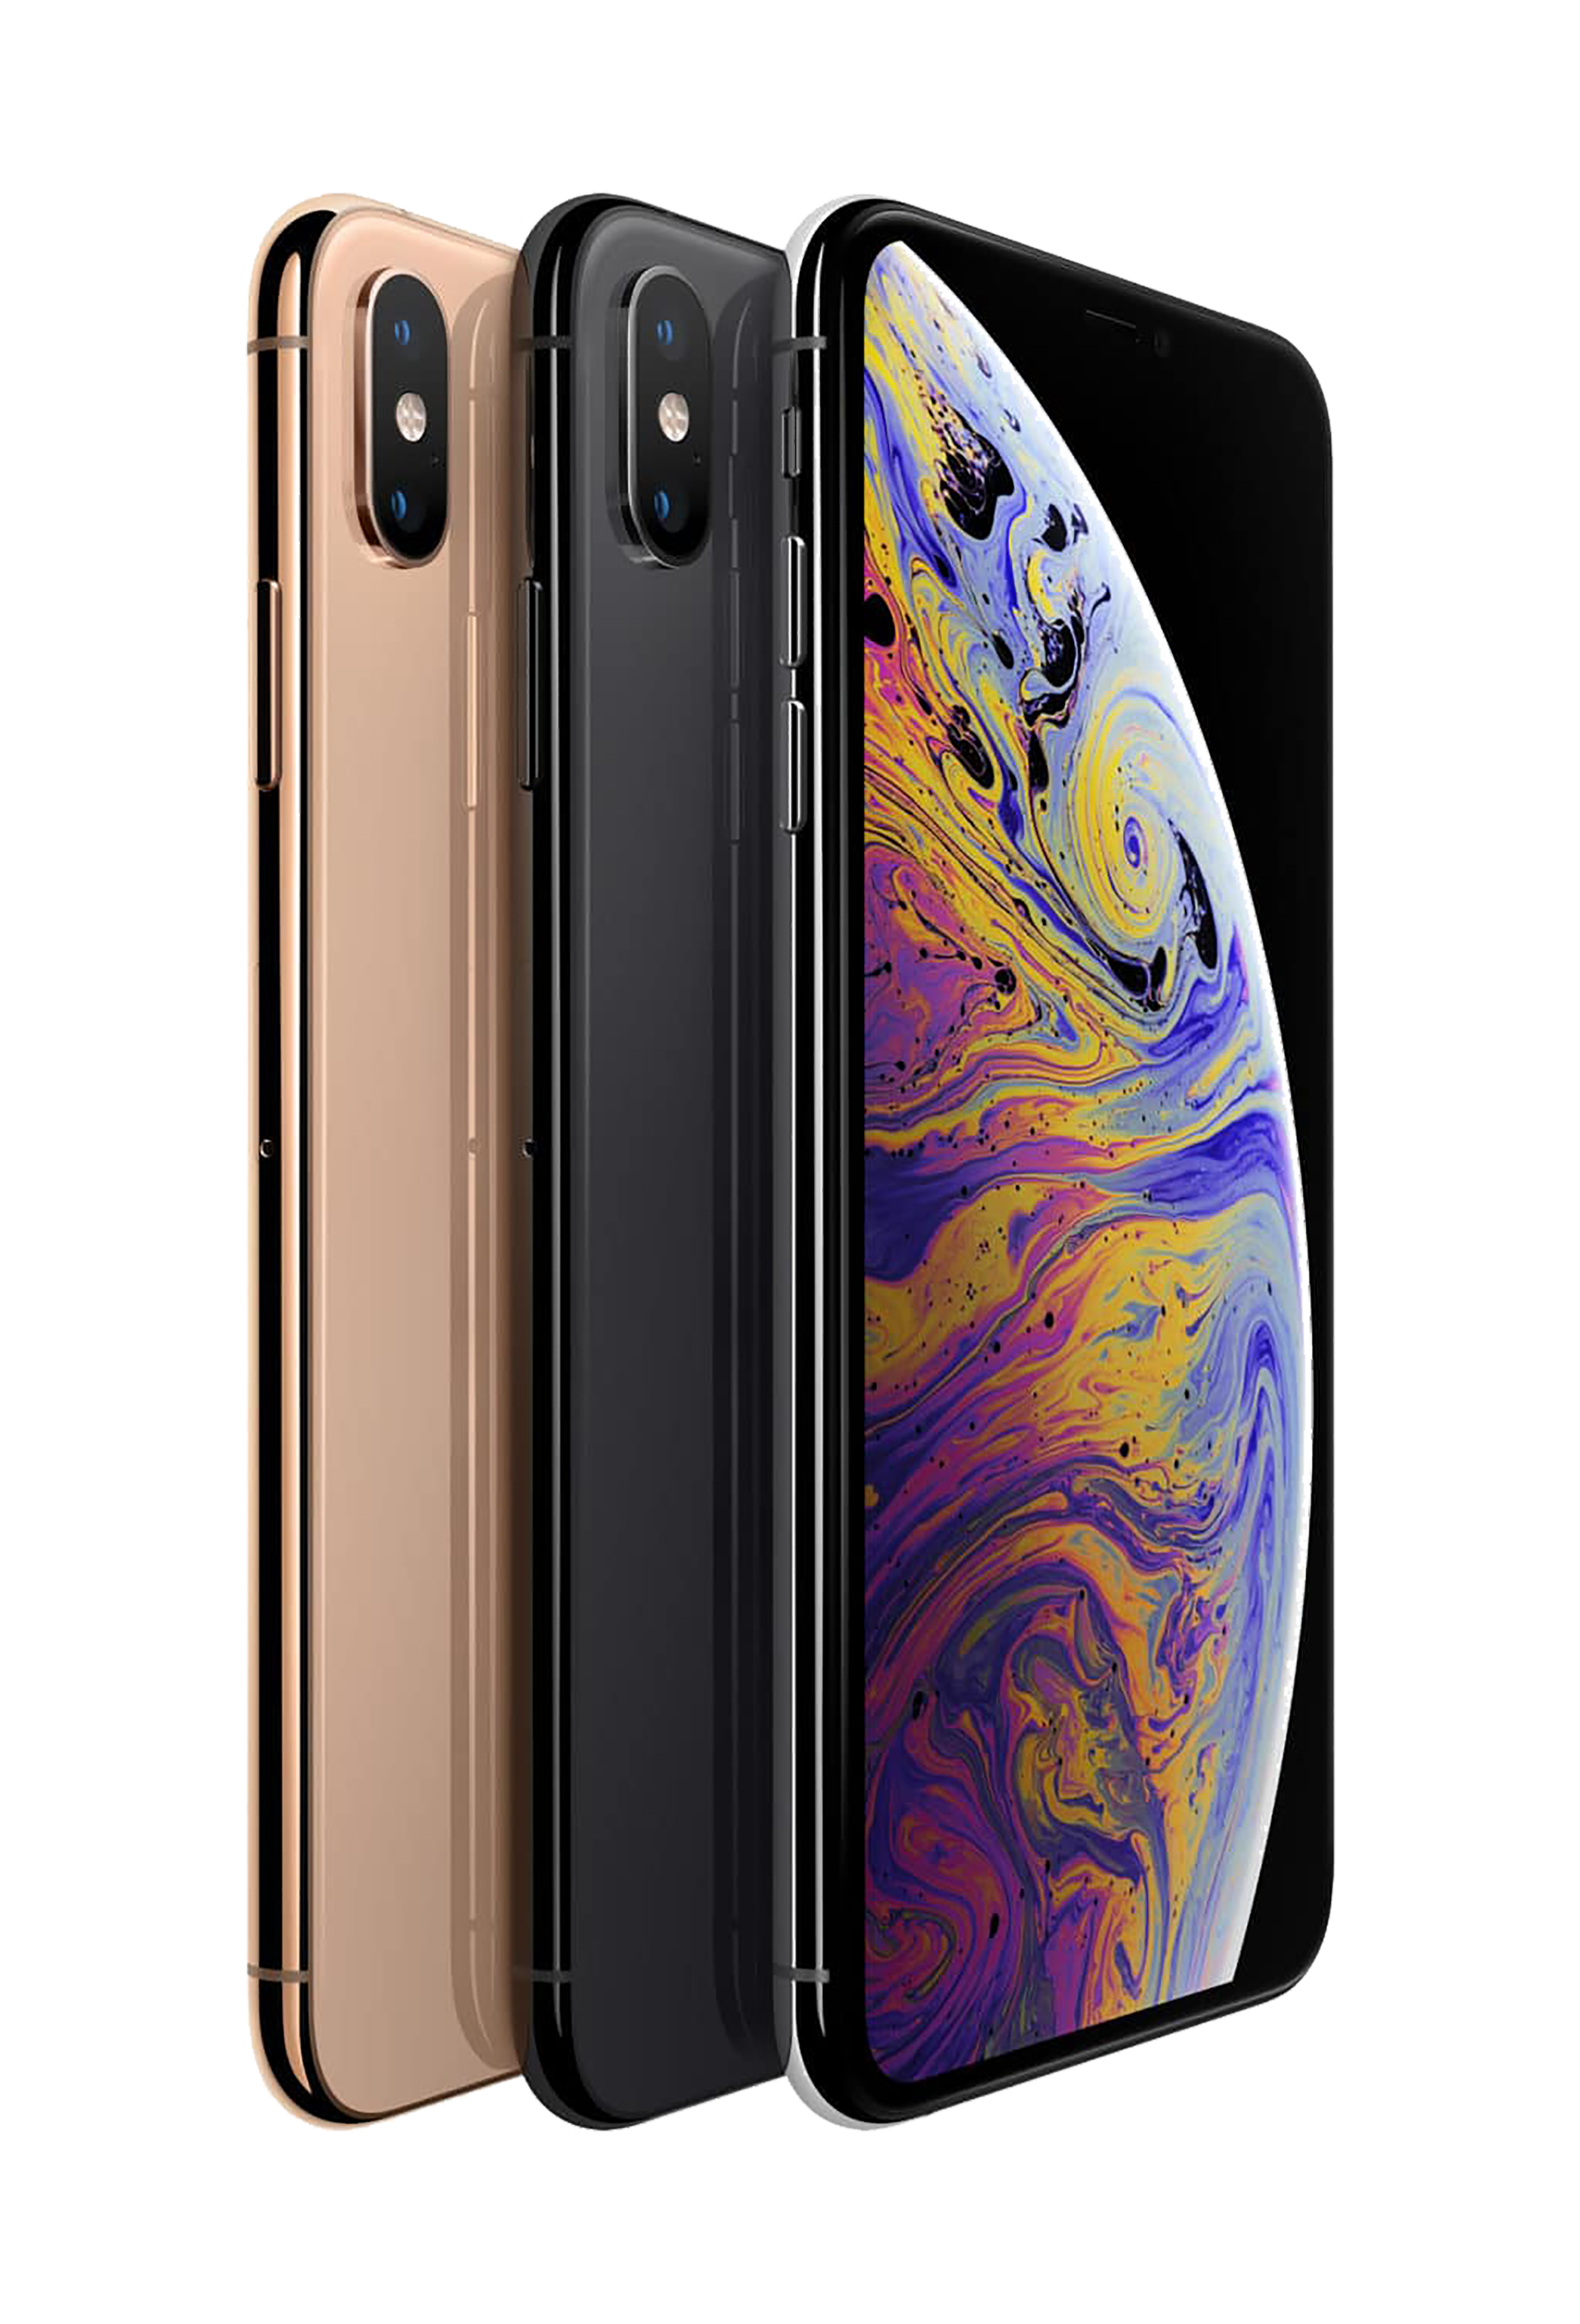 Apple-iPhone-XS-Max | Real Estate Marketing